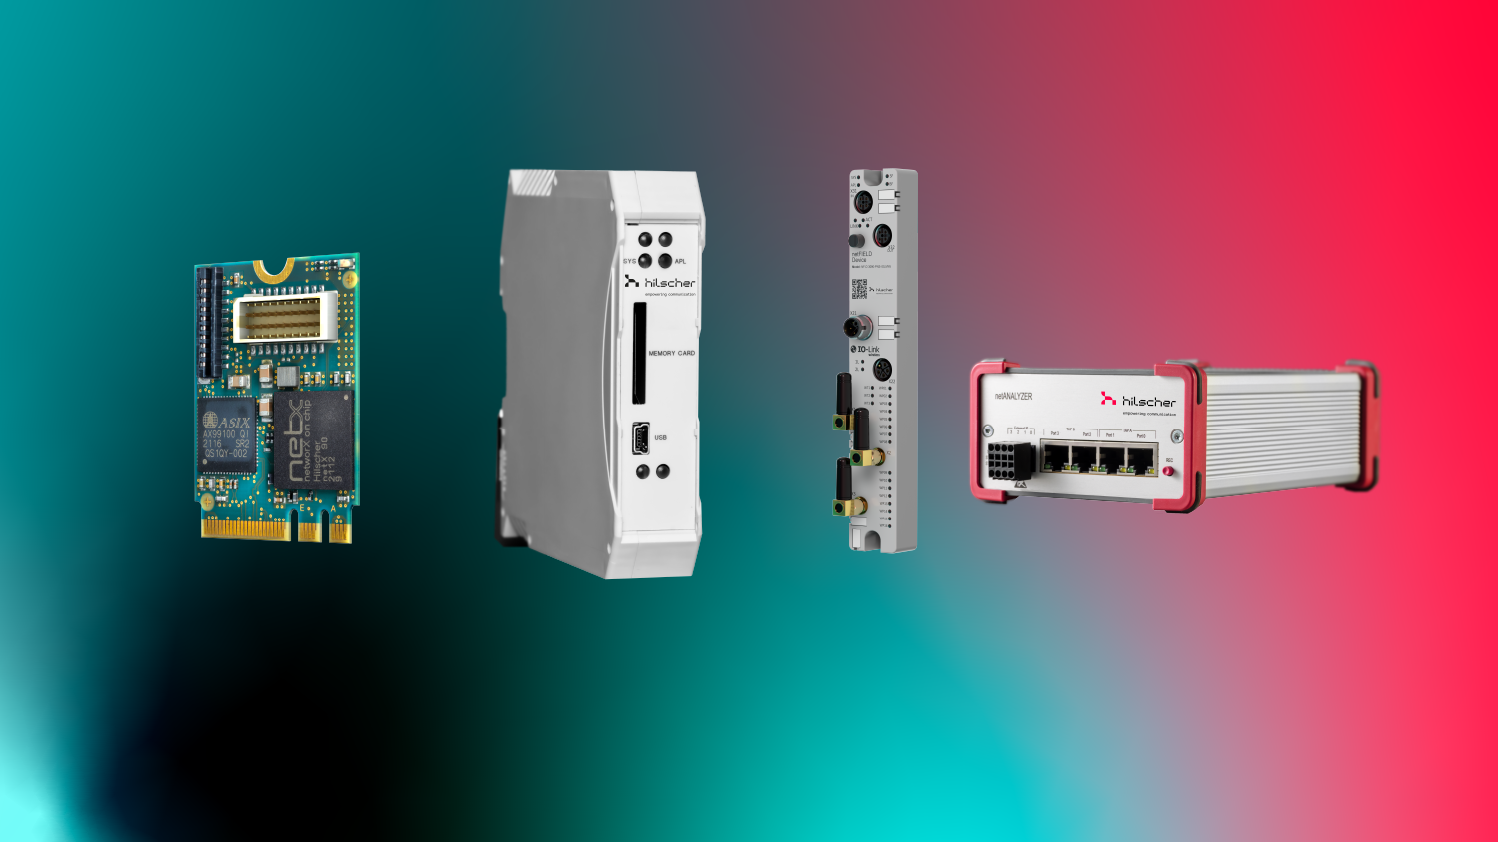 A cifX PC card, a netTAP gateway, an IO-Link Wireless Master and a netANALYZER are presented on a colorful background.